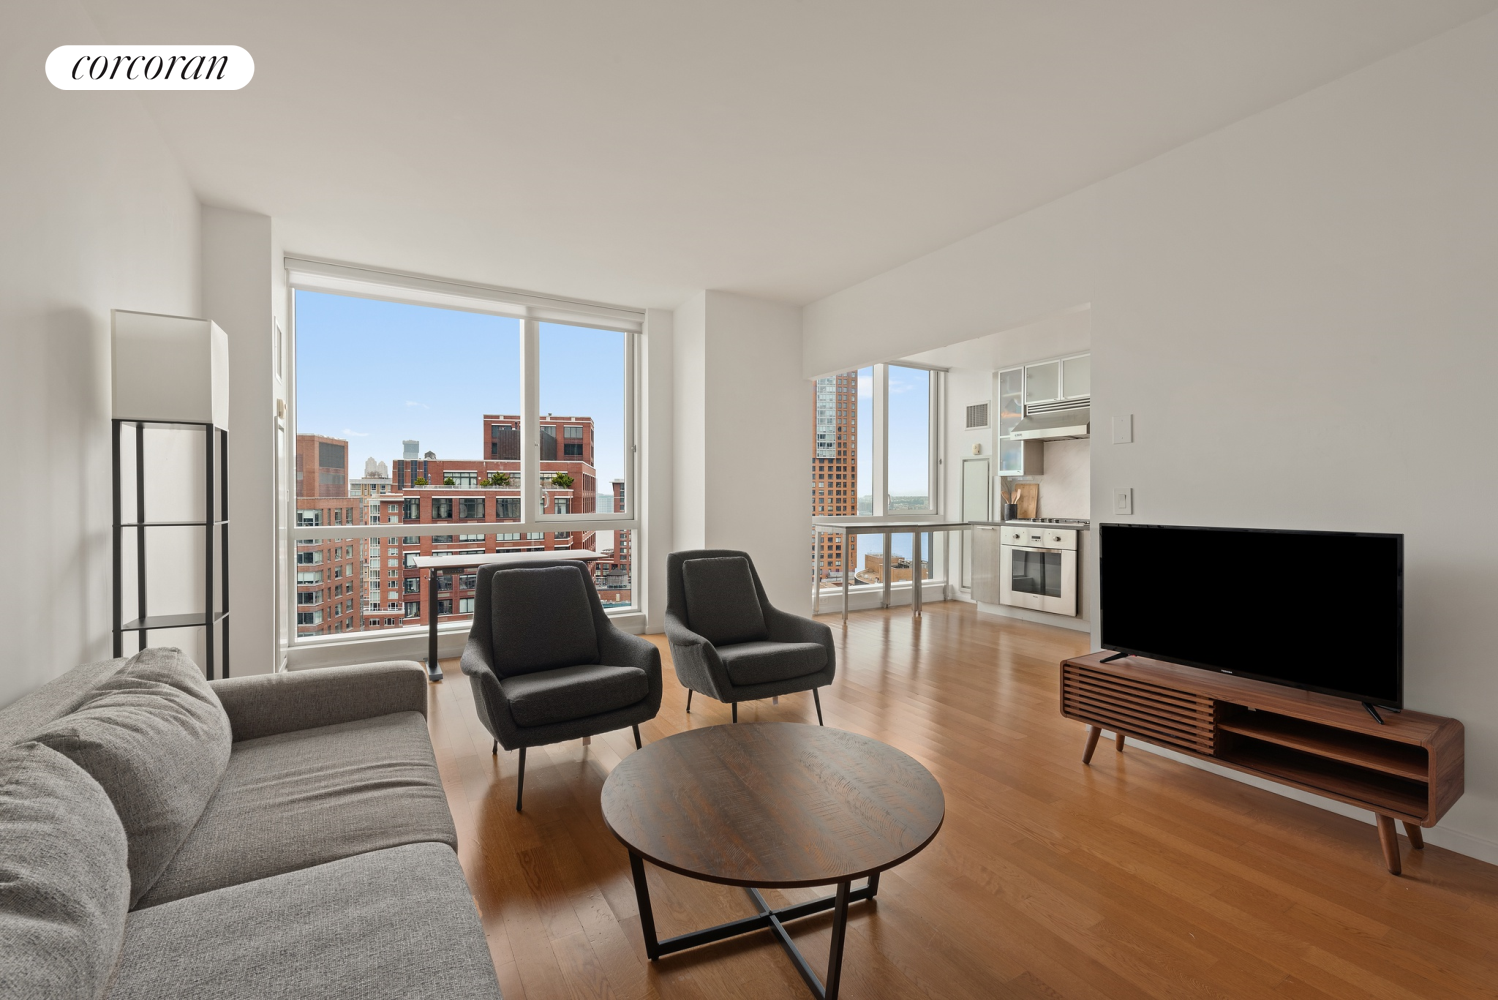 200 Chambers Street 25B, Tribeca, Downtown, NYC - 2 Bedrooms  
2 Bathrooms  
4 Rooms - 